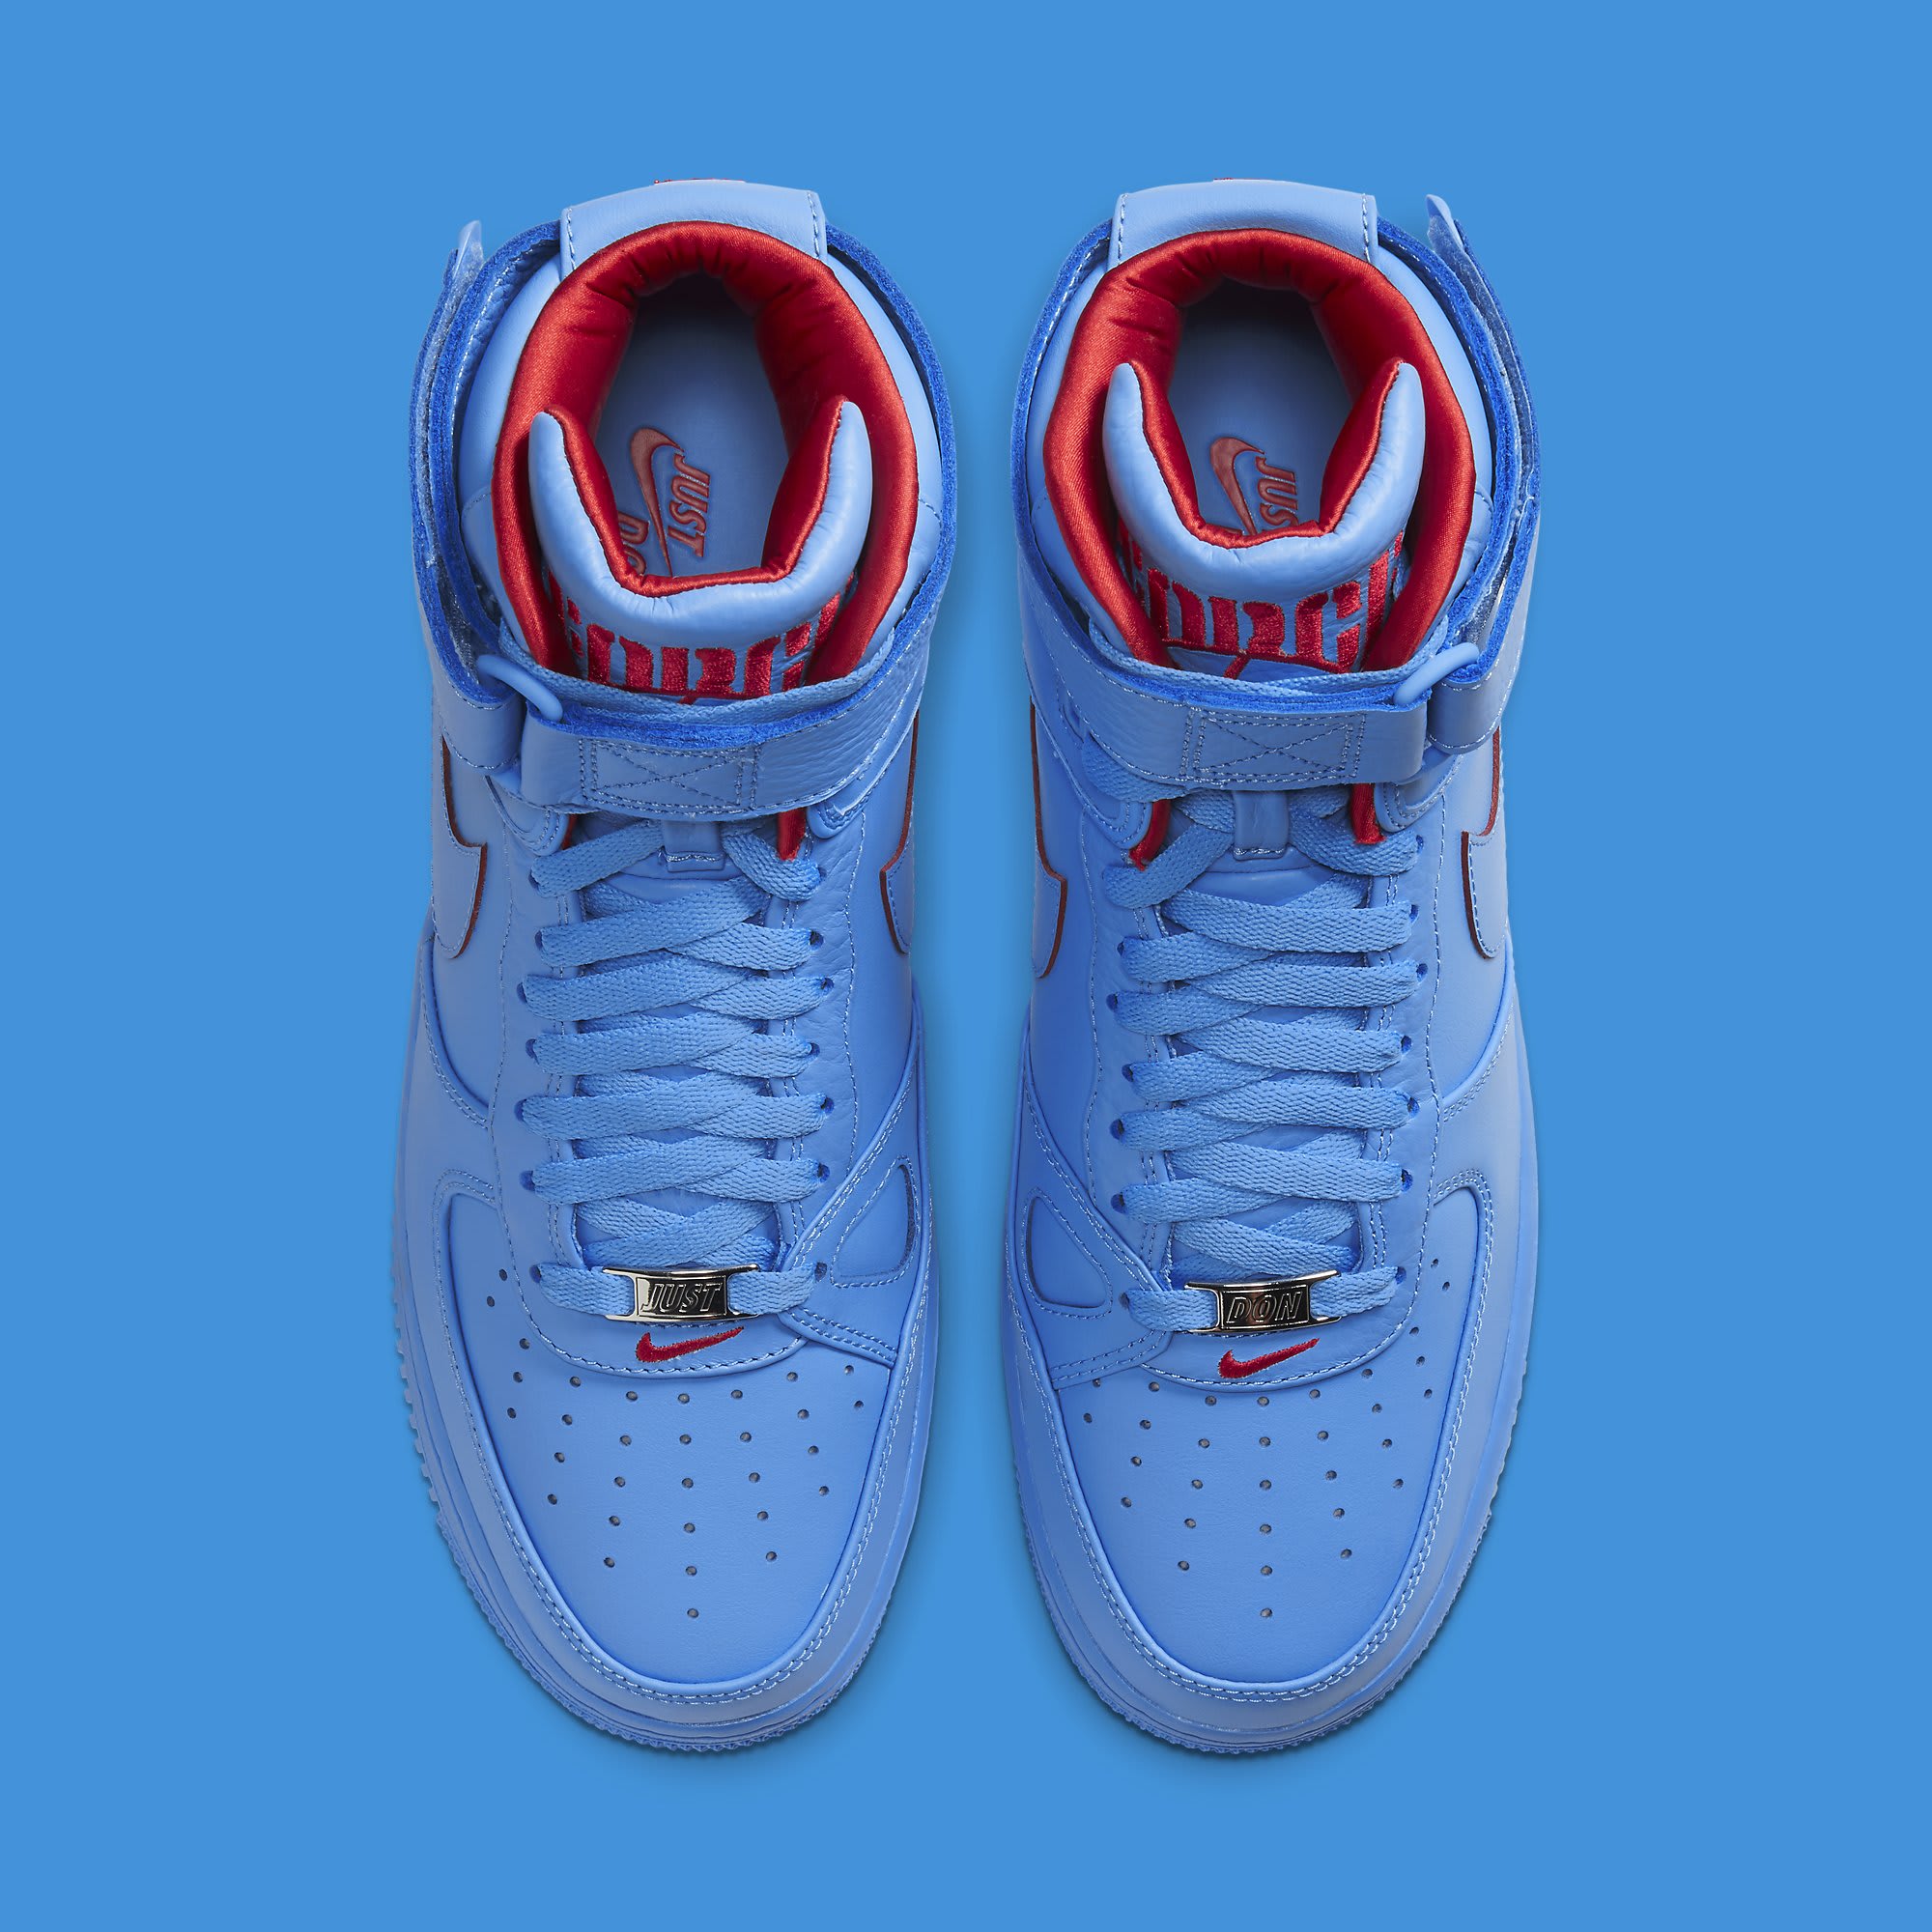 Don C x Nike Air Force 1 High Release Date Revealed: Official Photos